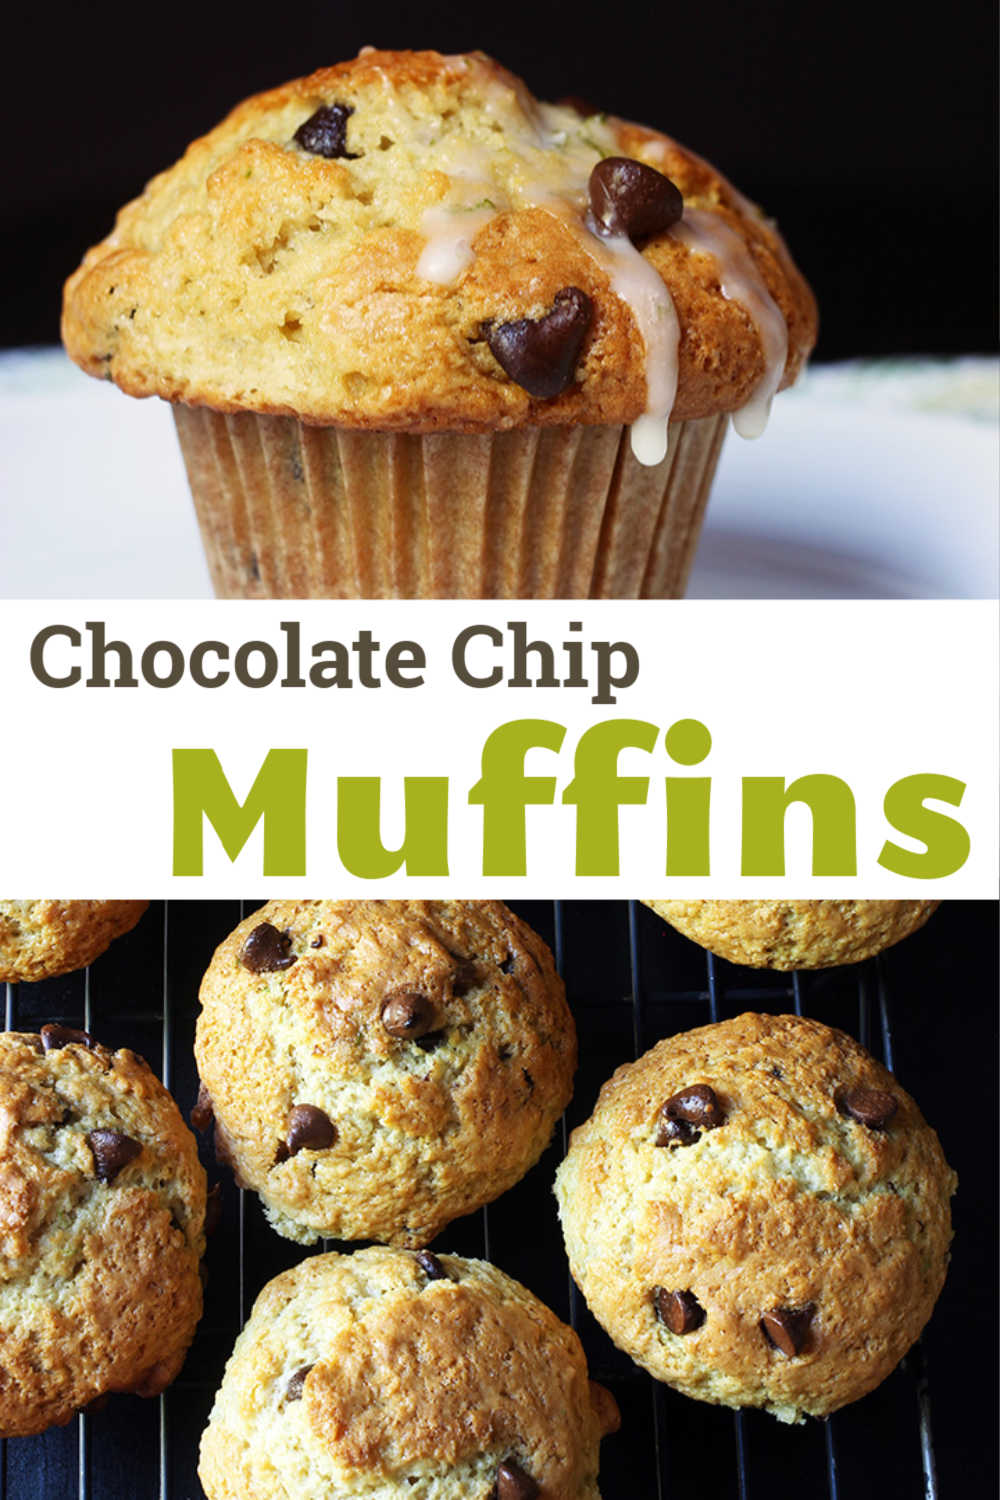 A close up of chocolate chip muffins